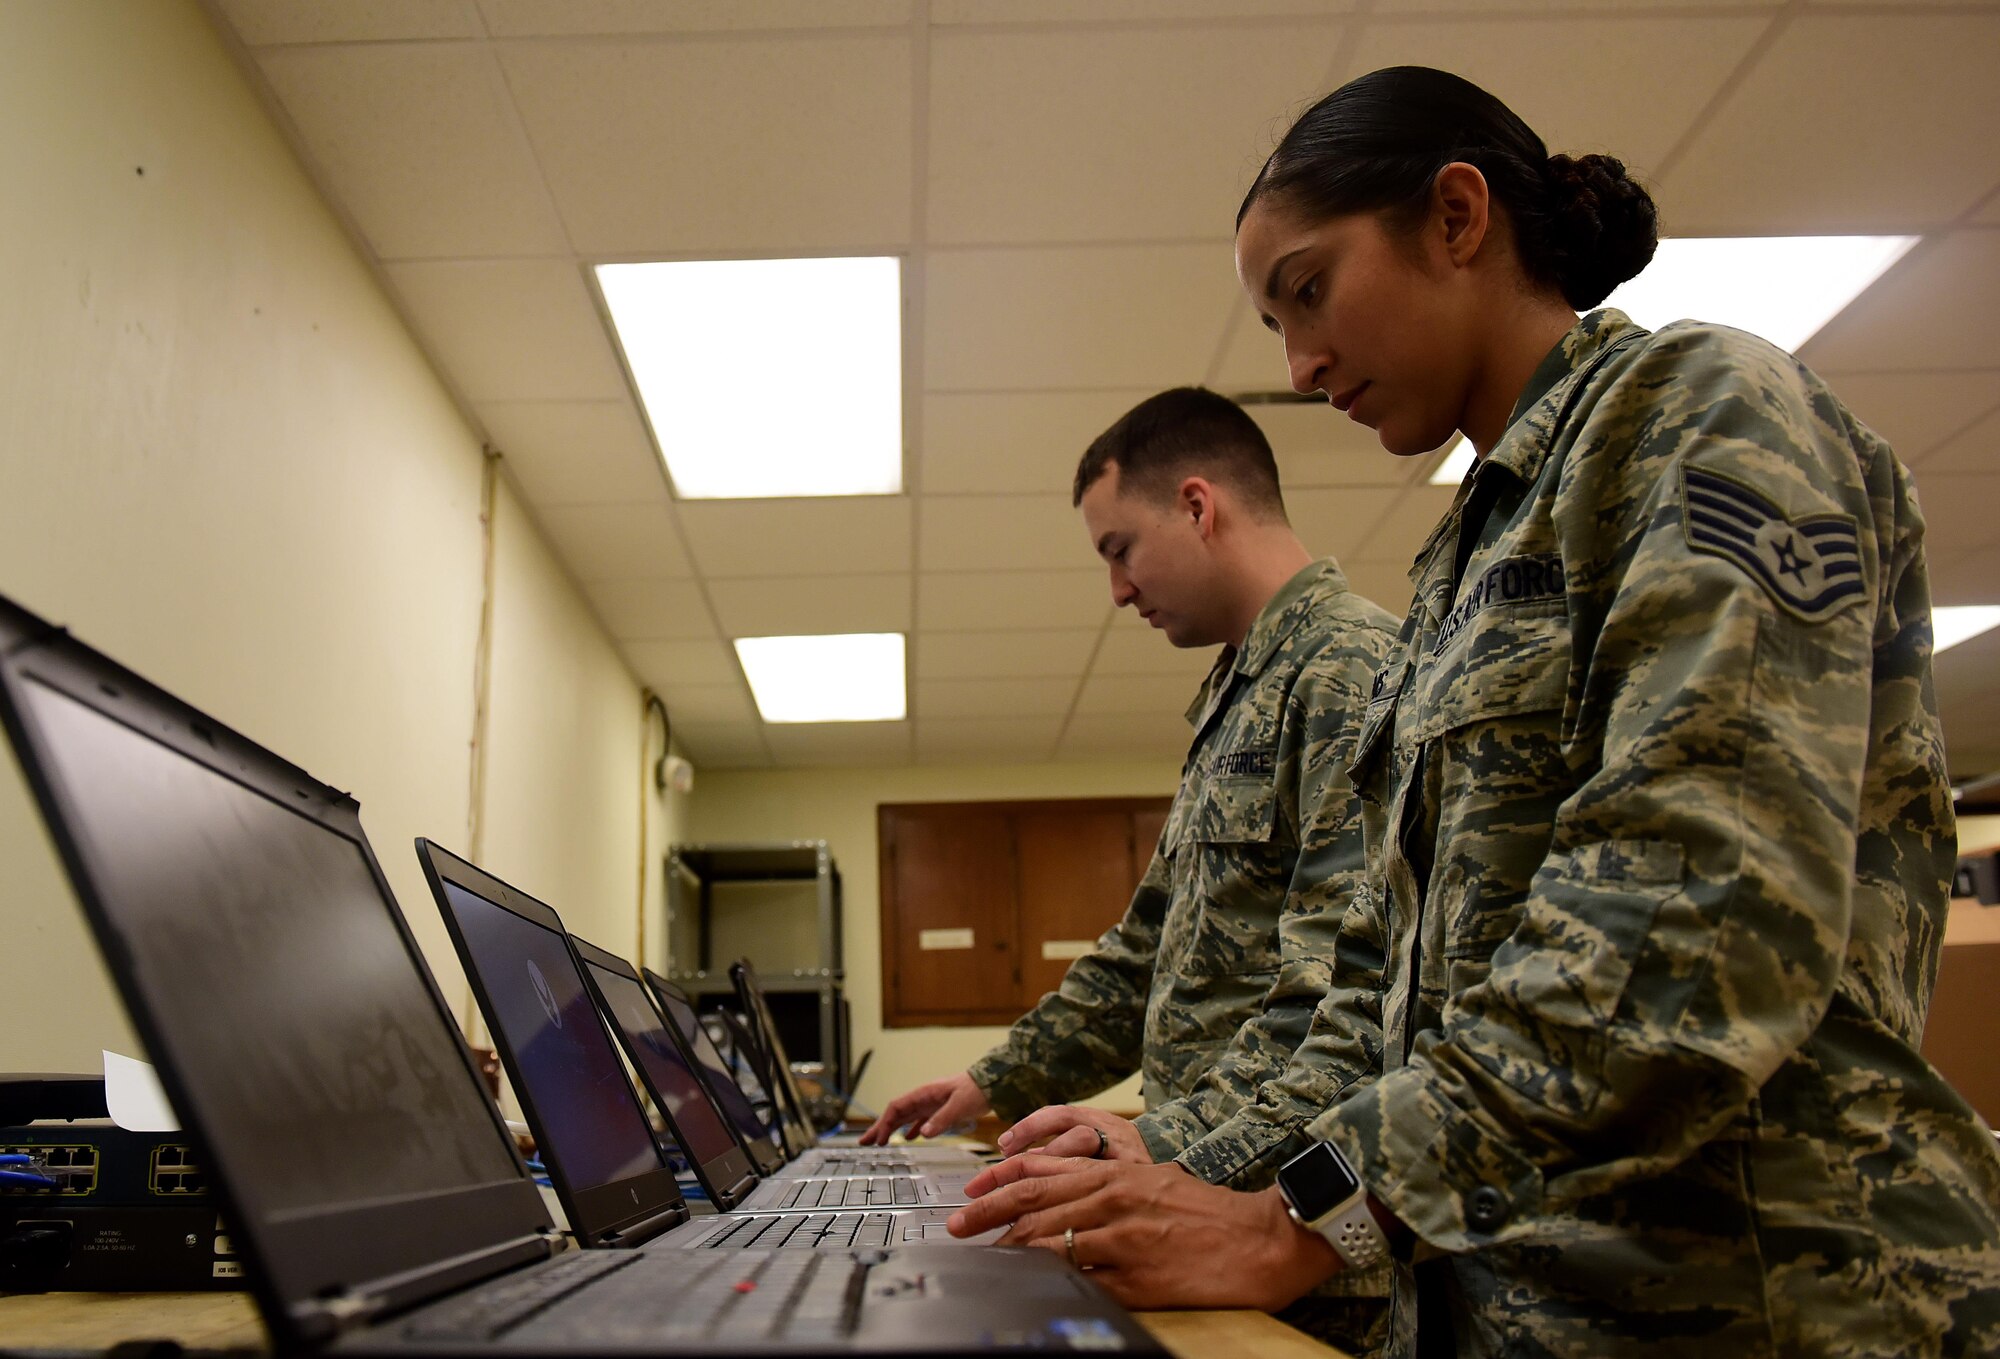 Airman 1st Class Joshua Burton and Staff Sgt. Jennifer Collins, both 4th Communications Squadron client services technicians, prepare new Windows 10 laptops for use, July 12, 2017, at Seymour Johnson Air Force Base, North Carolina. In addition to their usual workload of 40-60 trouble tickets annually, client service technicians work on 100 new computers each week. (U.S. Air Force photo by Airman 1st Class Kenneth Boyton)